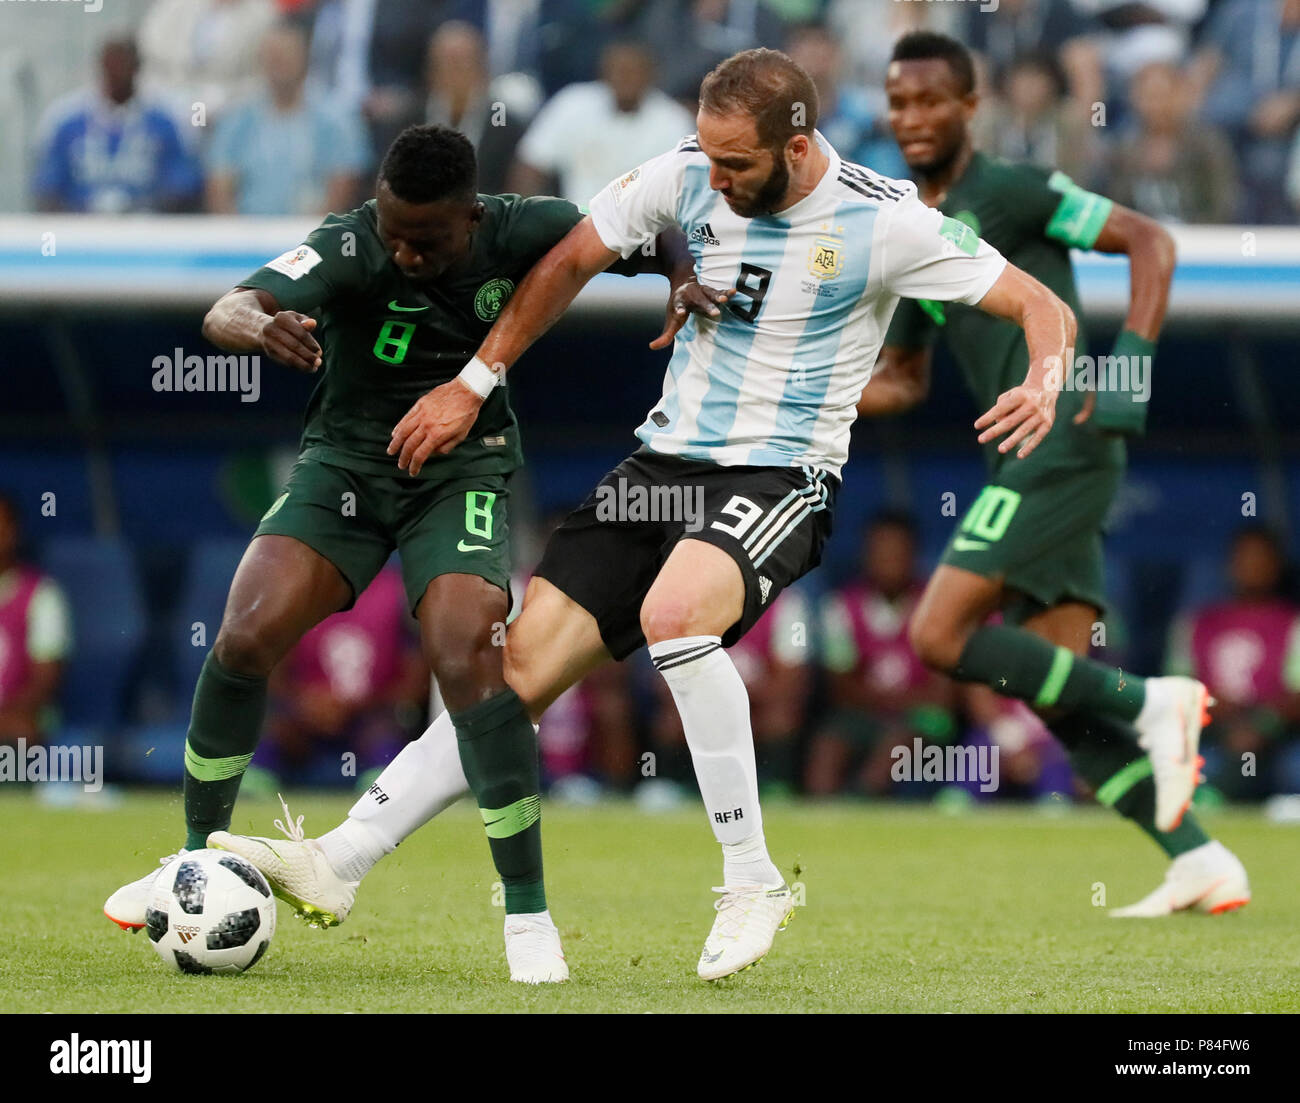 SAINT PETERSBURG, RUSSIA - JUNE 26: Oghenekaro Etebo (L) of Nigeria national team and Gonzalo Higuain of Argentina national team vie for the ball during the 2018 FIFA World Cup Russia group D match between Nigeria and Argentina at Saint Petersburg Stadium on June 26, 2018 in Saint Petersburg, Russia. (MB Media) Stock Photo